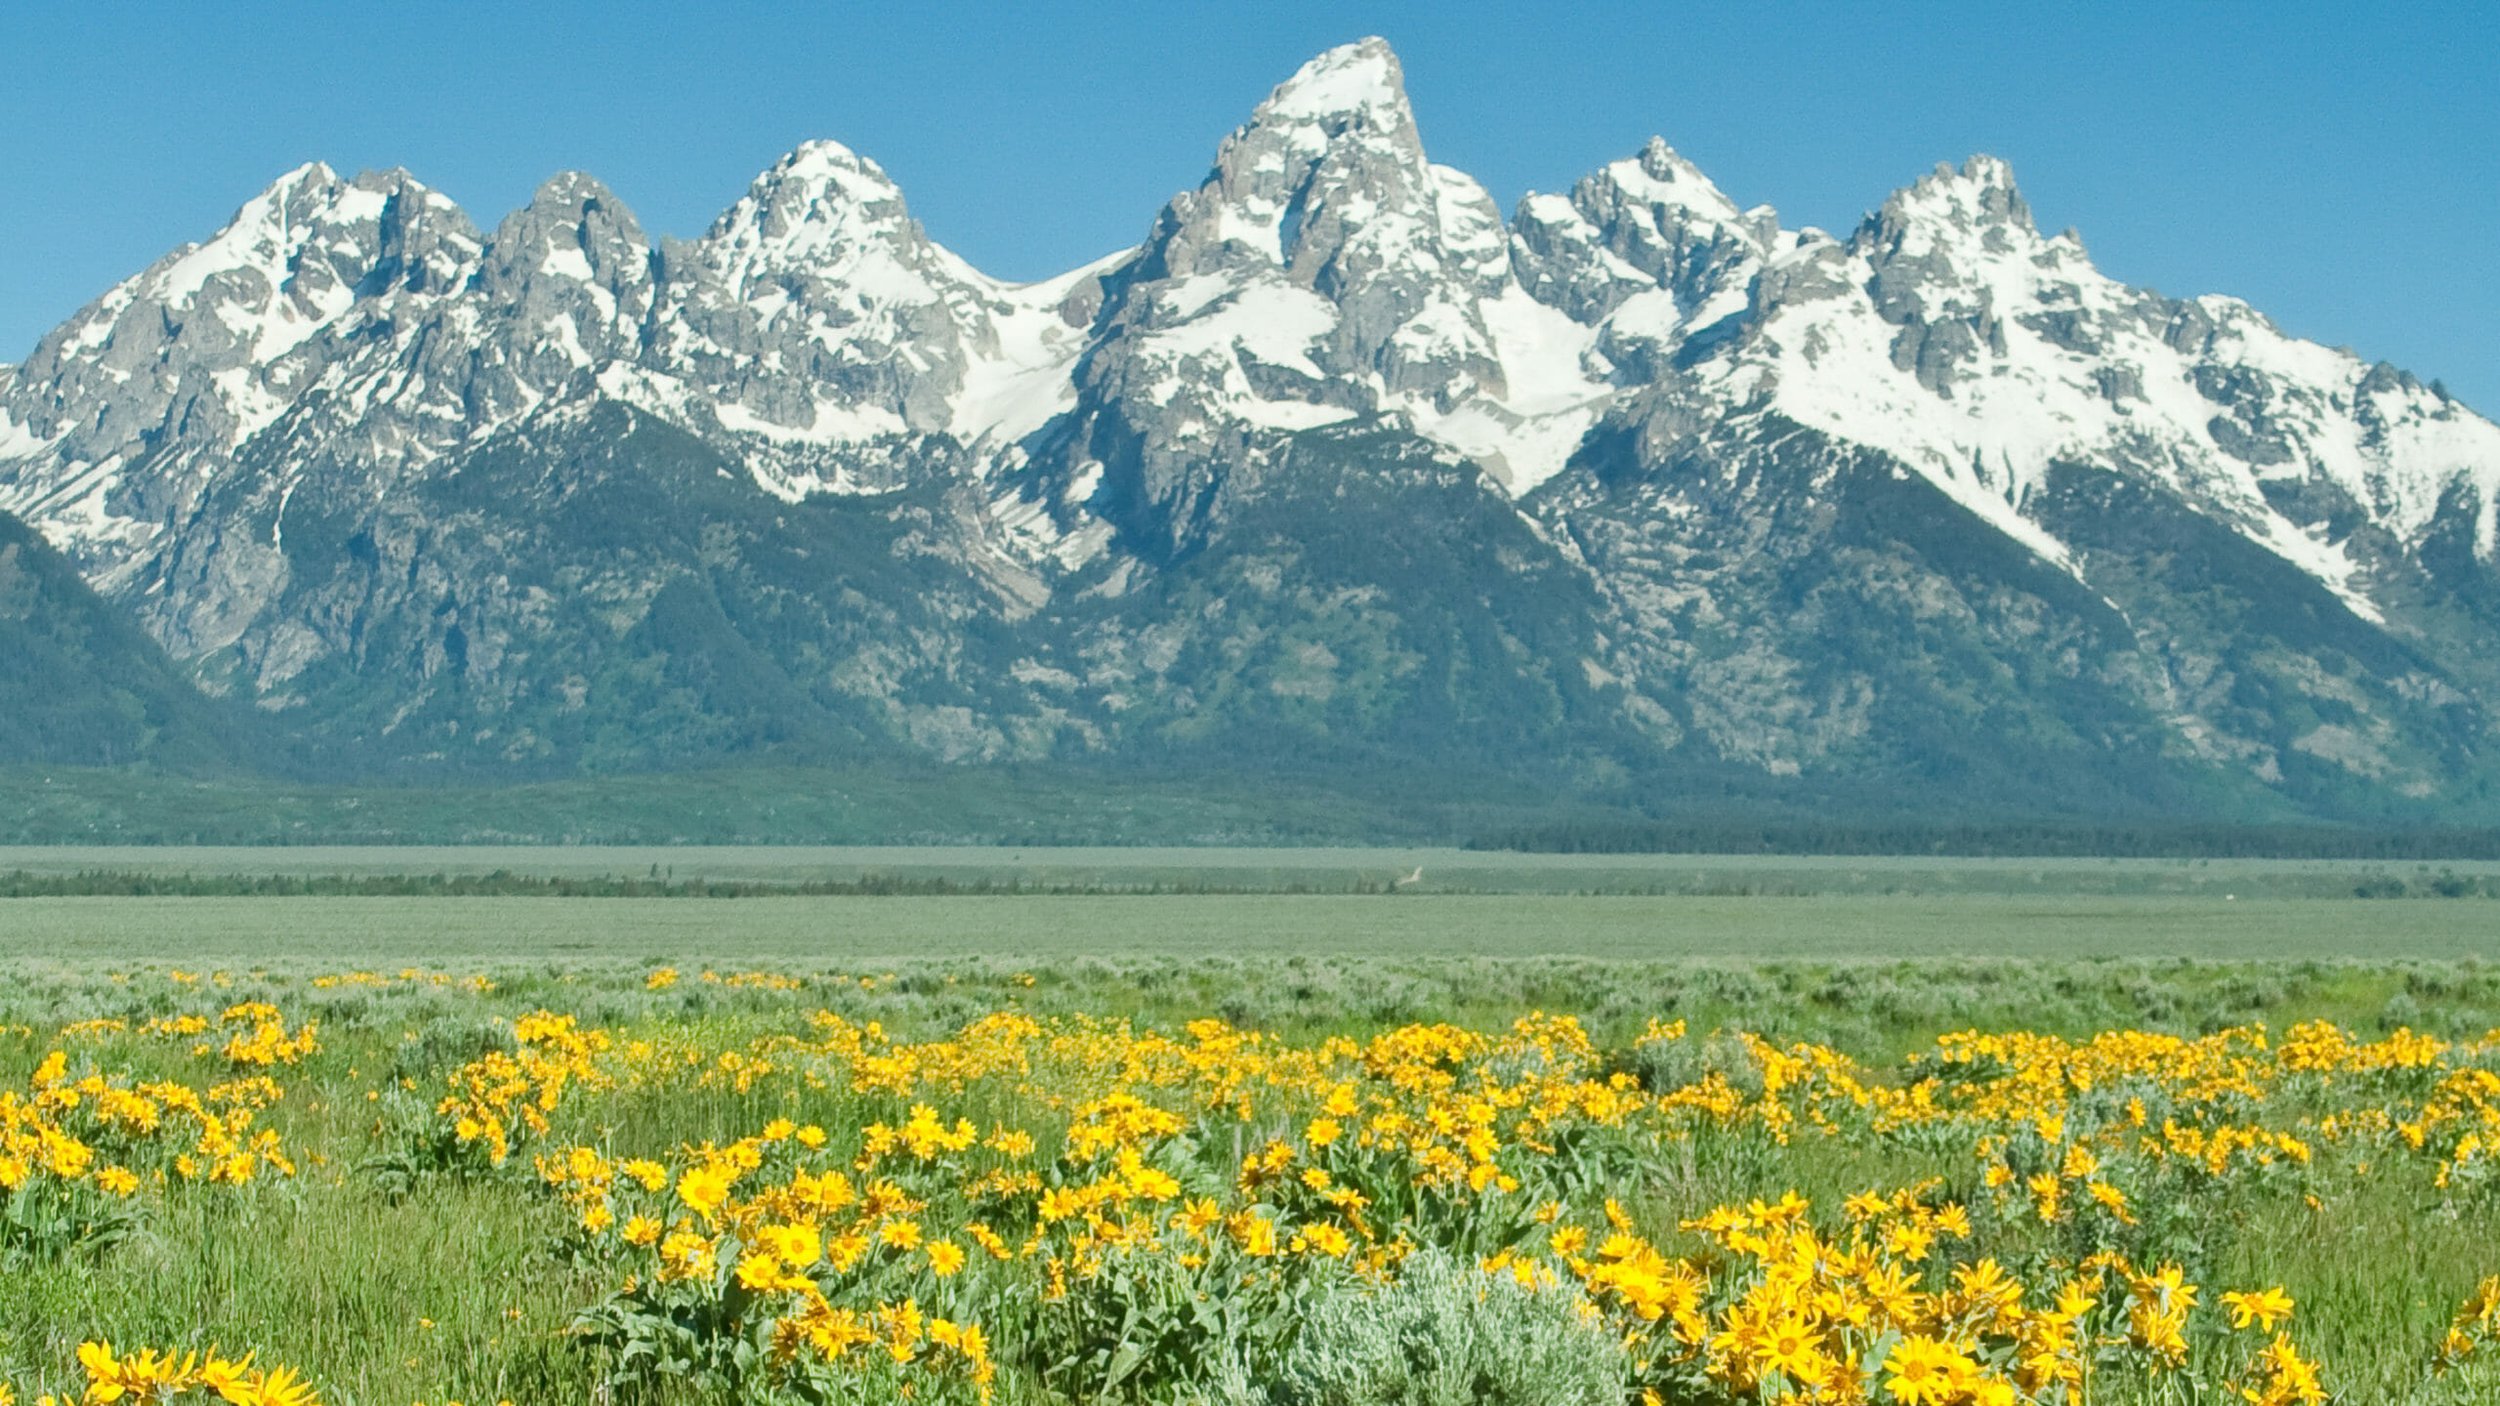 2880x1620-featured-image-grand-tetons-scaled.jpg